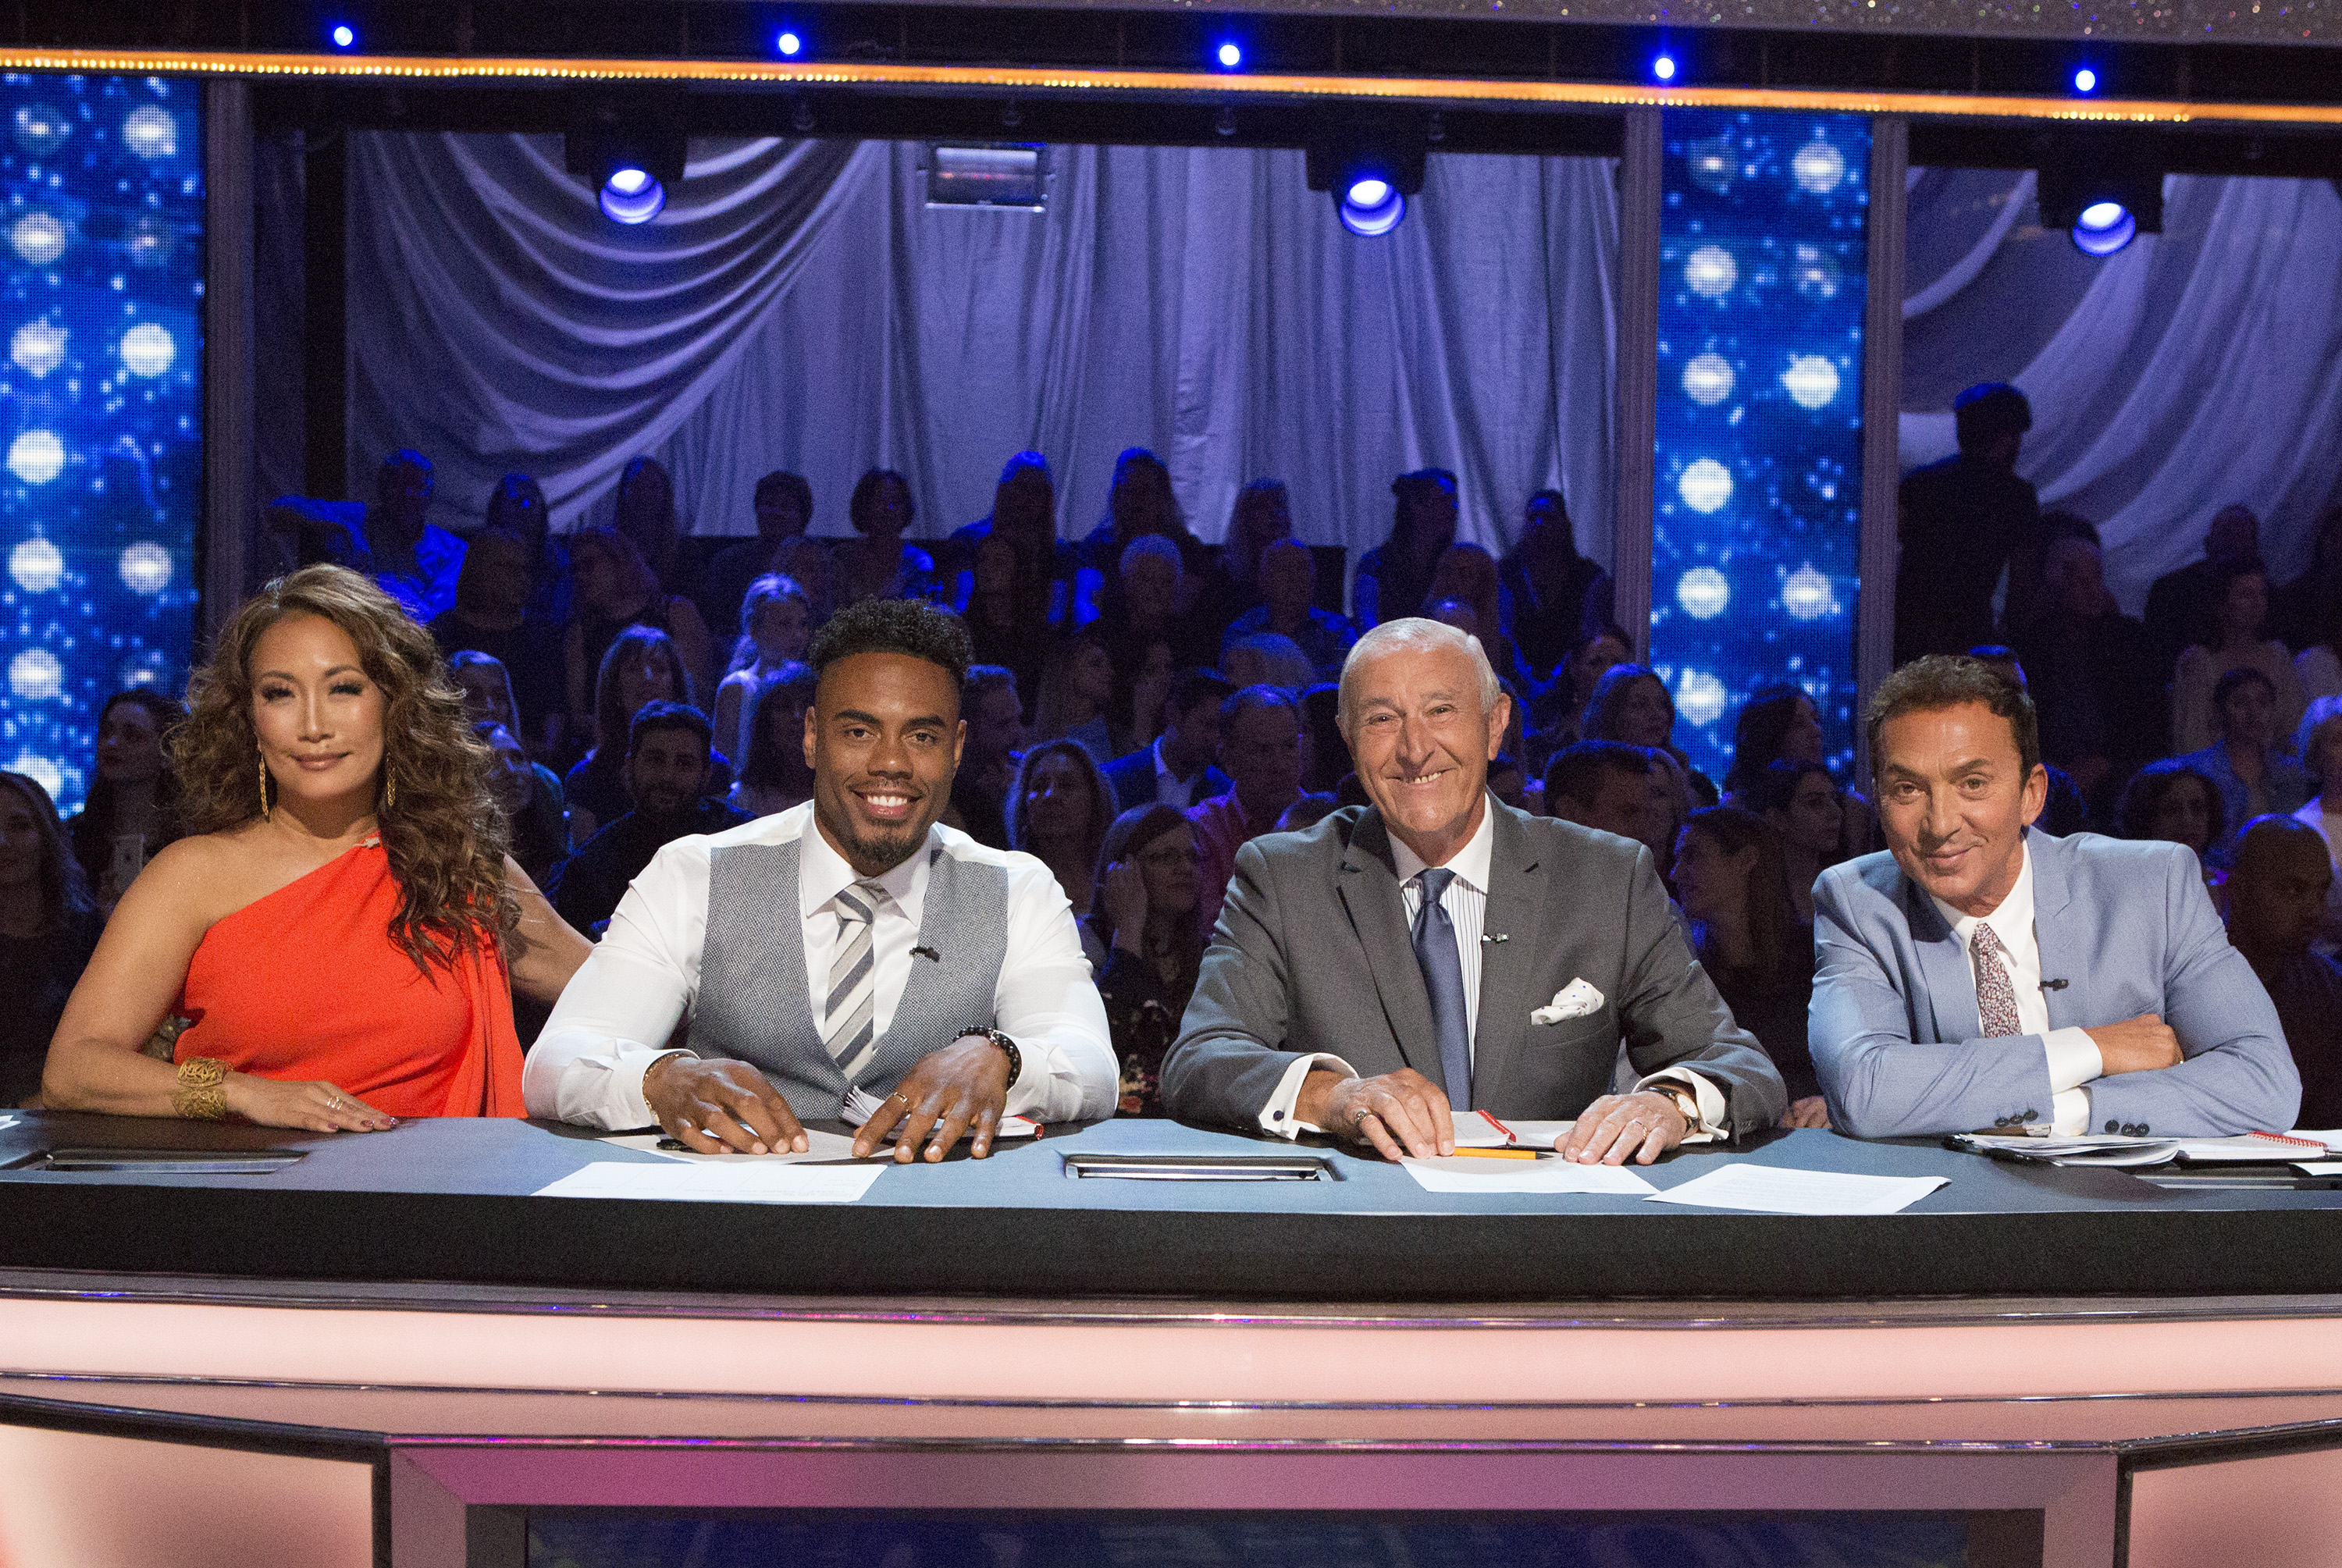 Carrie Ann Inaba, Rashad Jennings, Len Goodman, Bruno Tonioli pictured on the sets of Season 26 of "Dancing with the Stars" on May 7, 2018 | Source: Getty Images